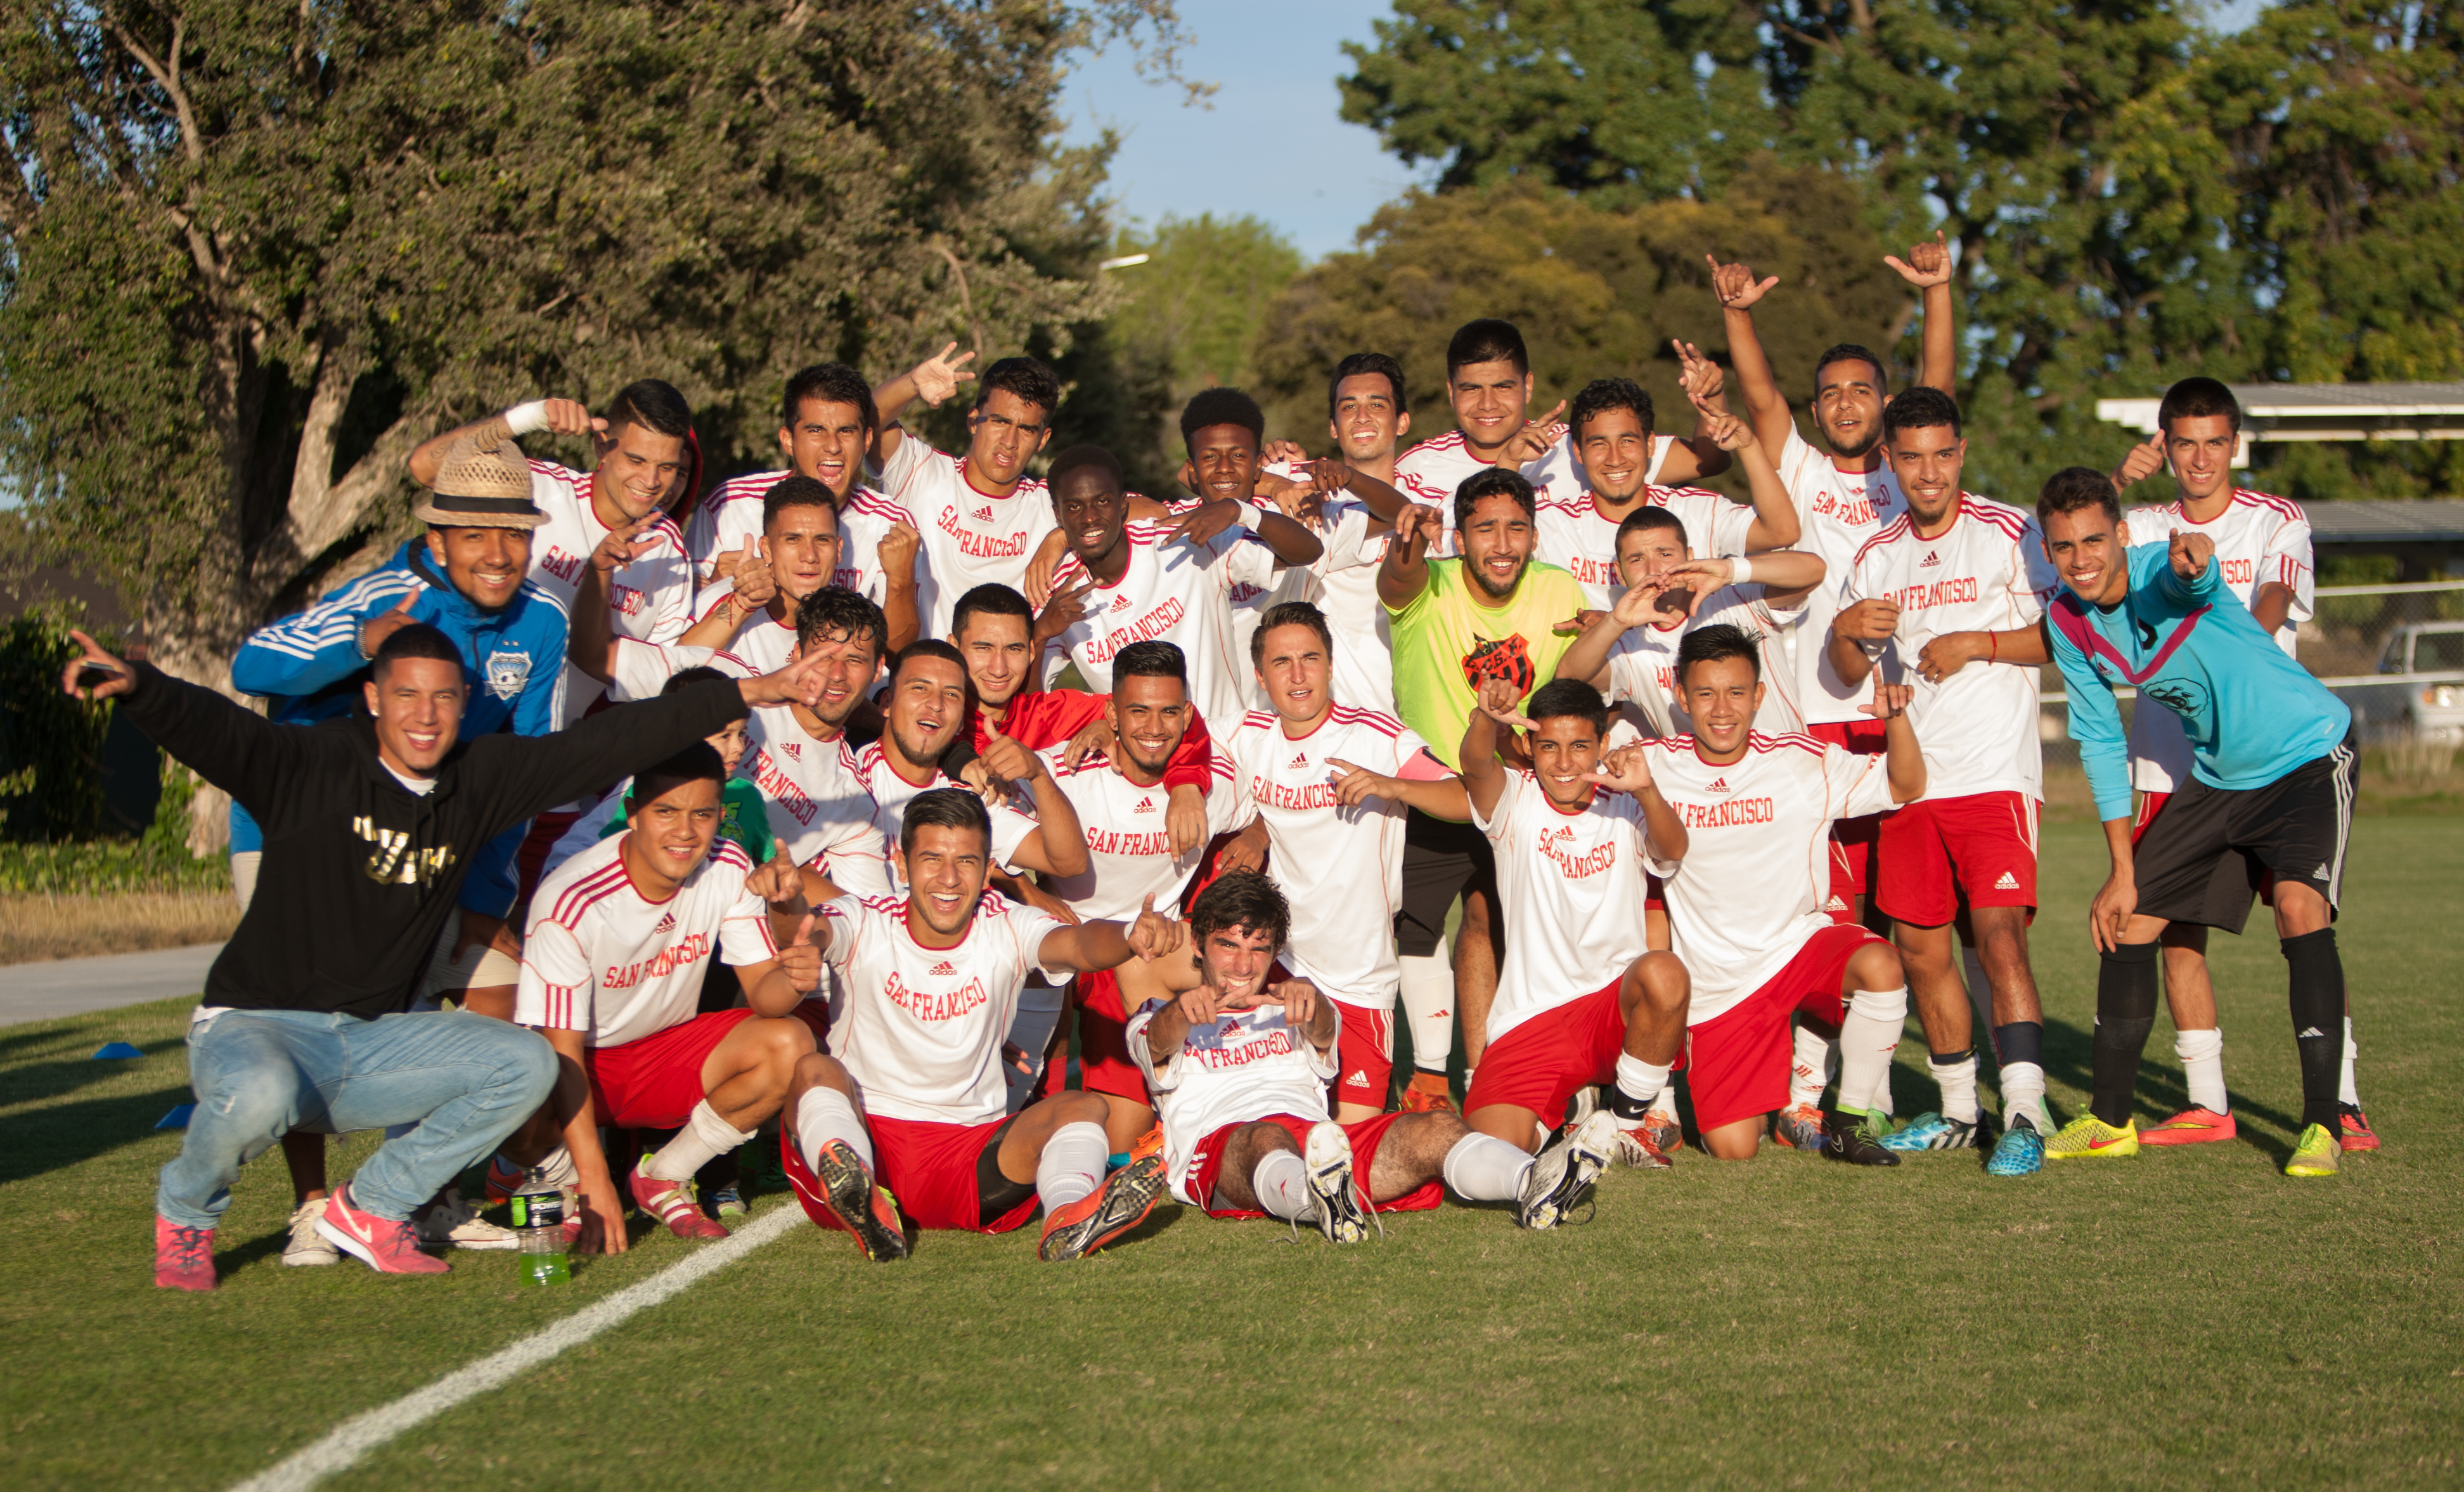 City College Rams celebrate the win, Friday, Oct. 10. (Photo by Khaled Sayed)